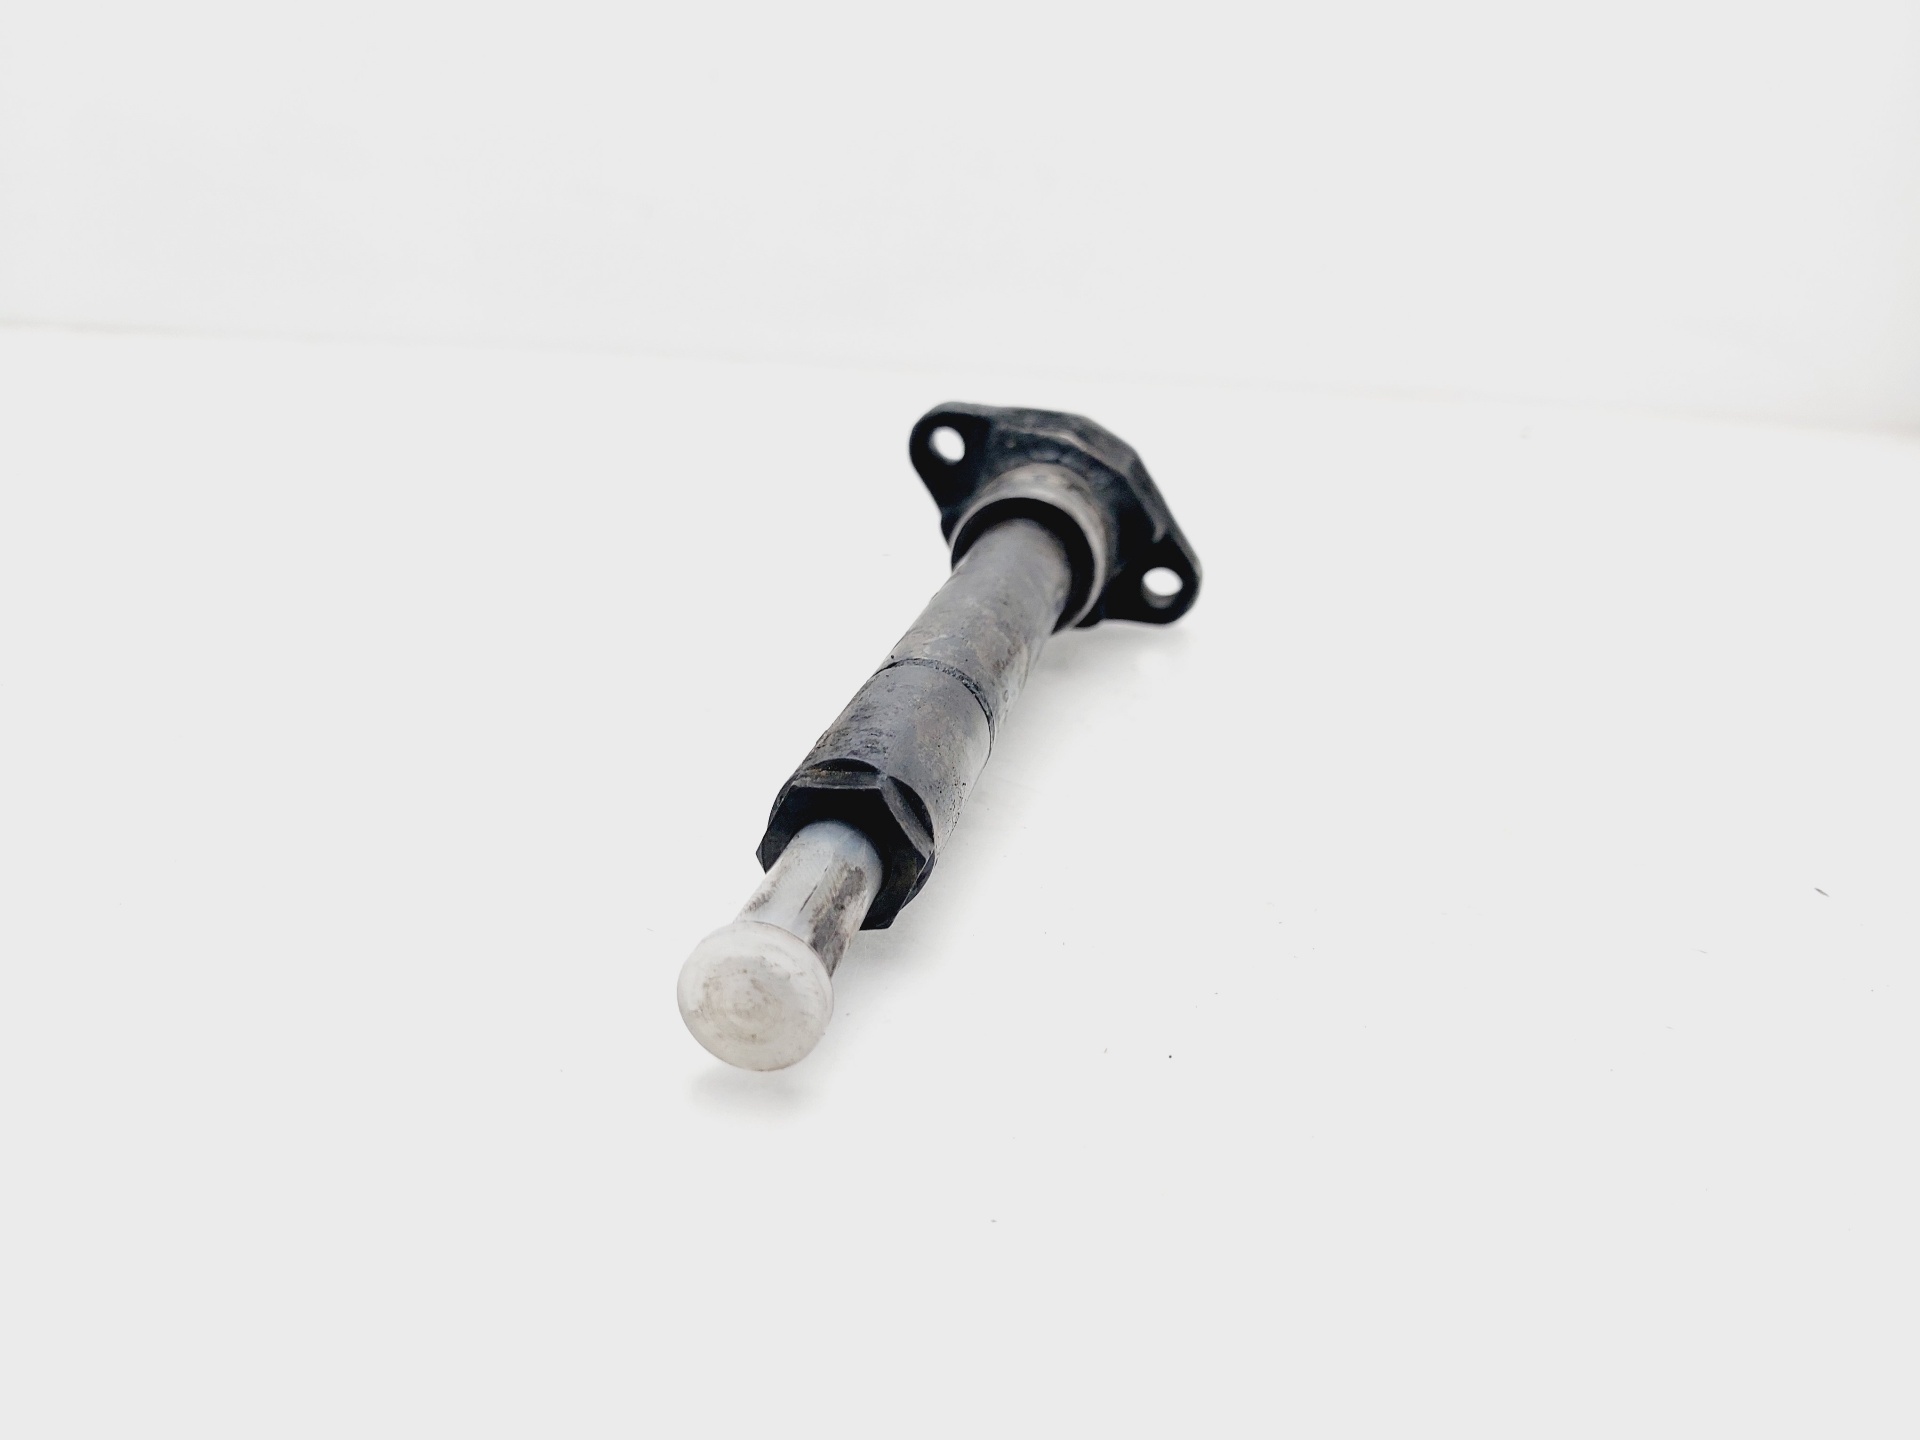 BMW 3 Series E46 (1997-2006) Fuel Injector 0432191398 25295918